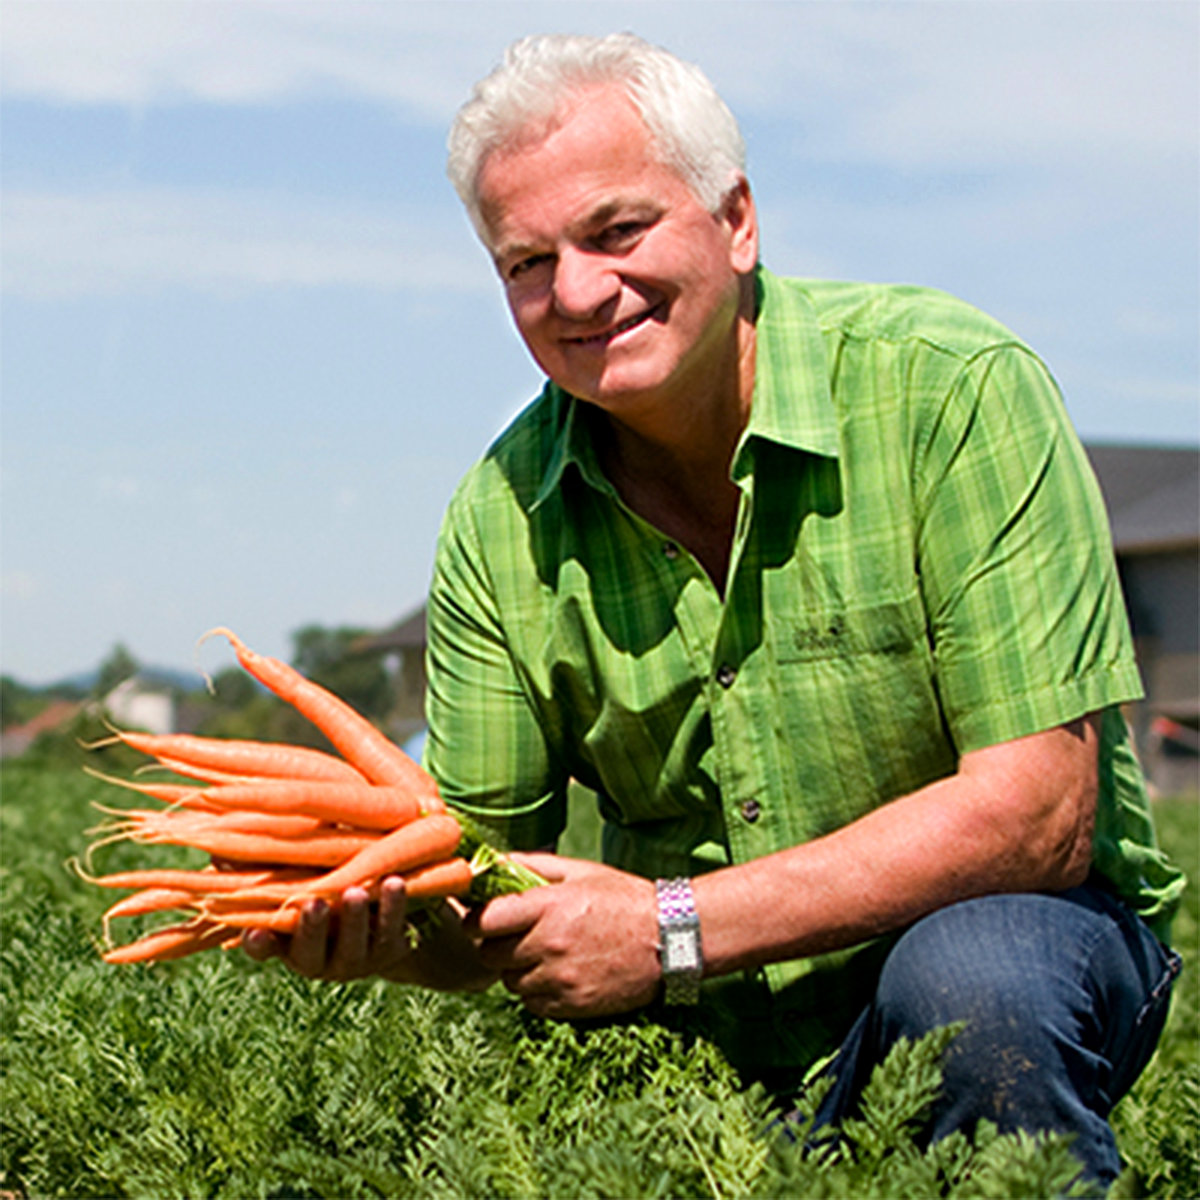 Vegetable farmer in field with carrots in his hands